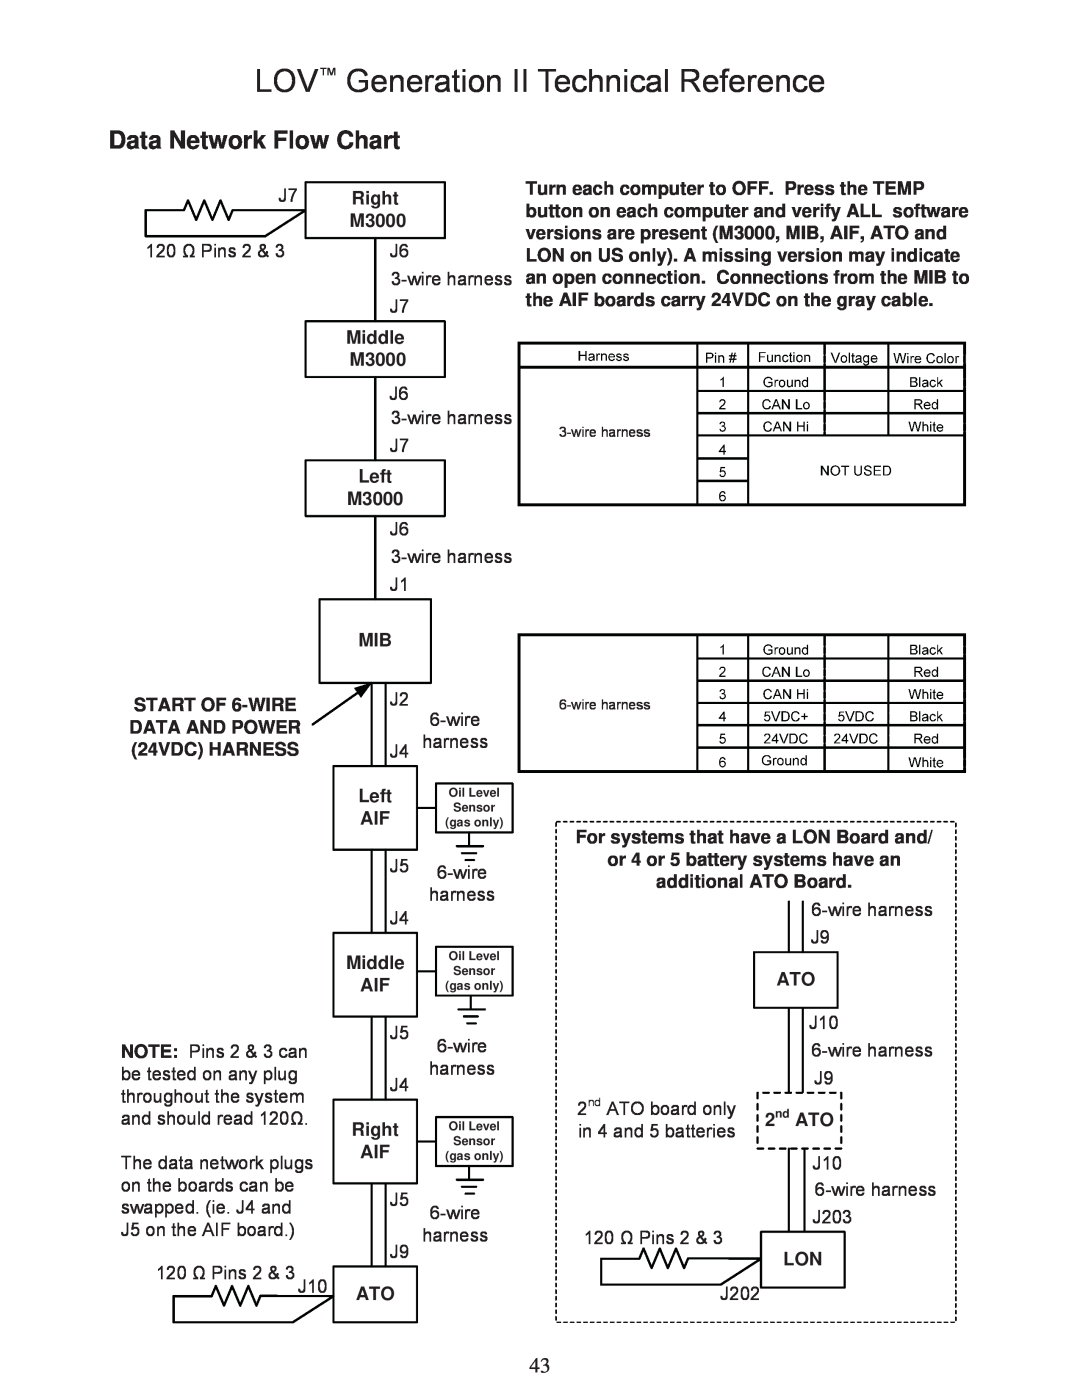 Frymaster M3000 manual Data Network Flow Chart, LOV Generation II Technical Reference, Middle, Right 